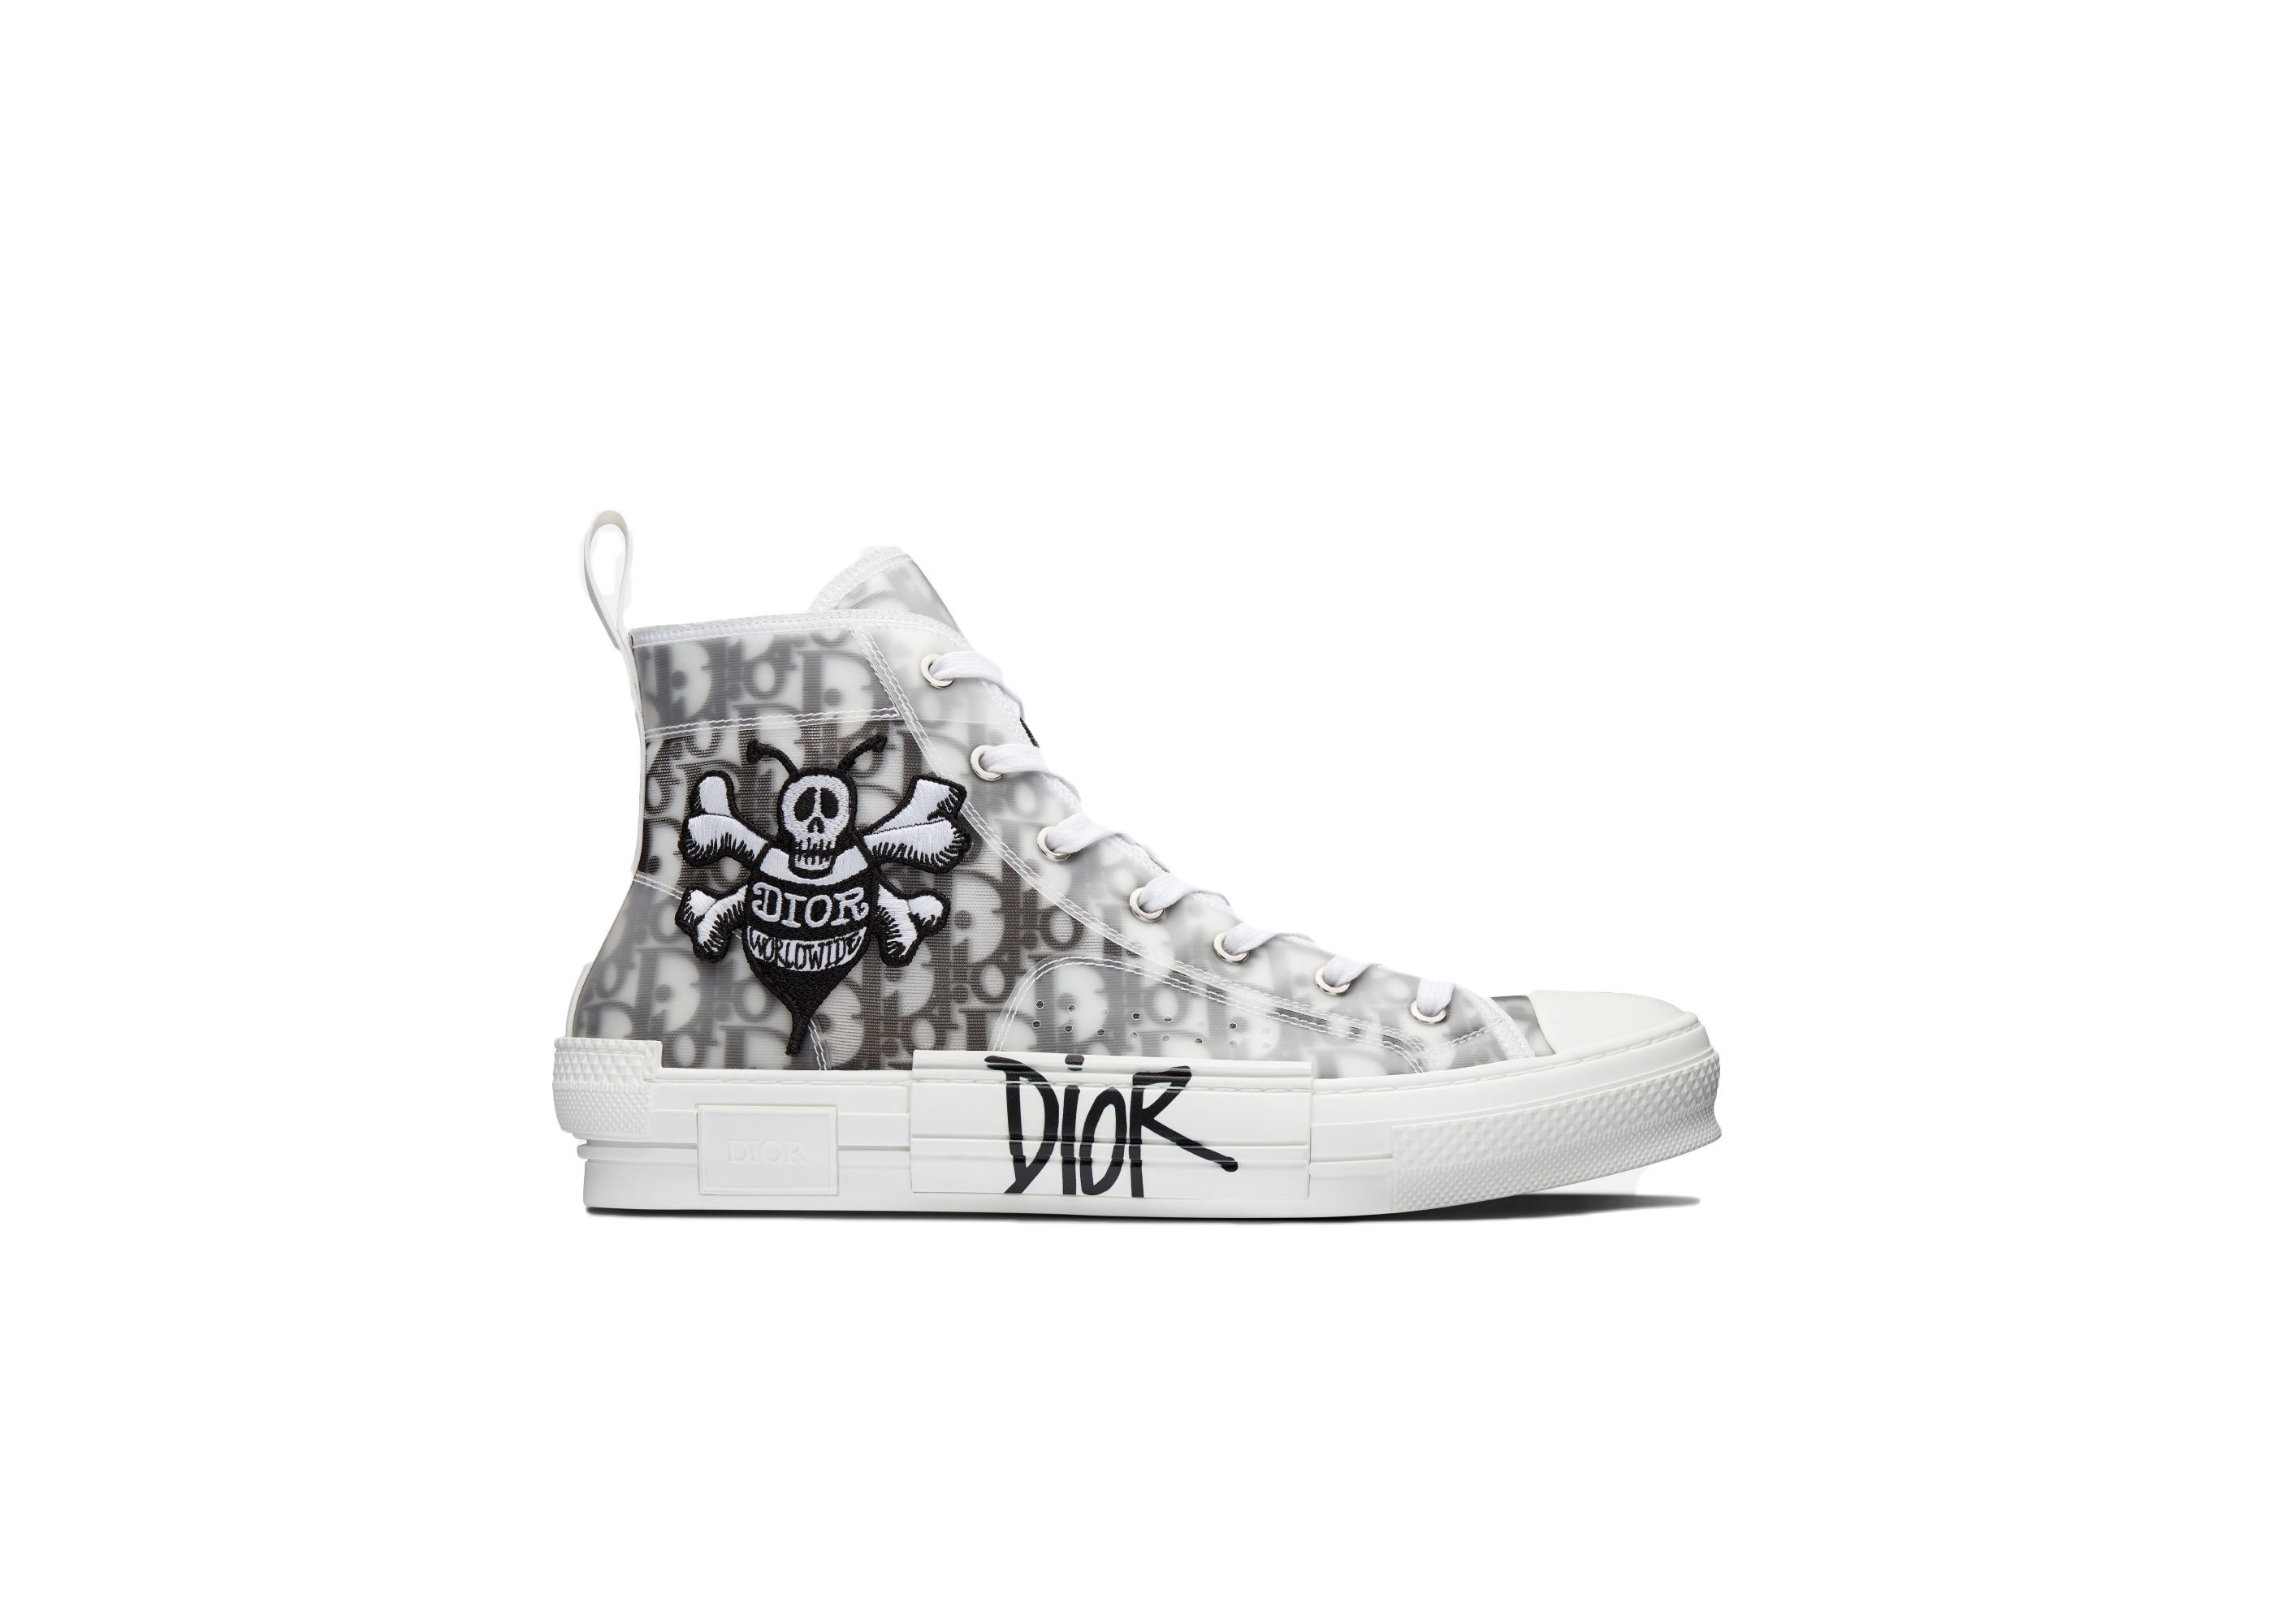 Buy Dior Sneakers and Shoes - StockX هدايا نفاس